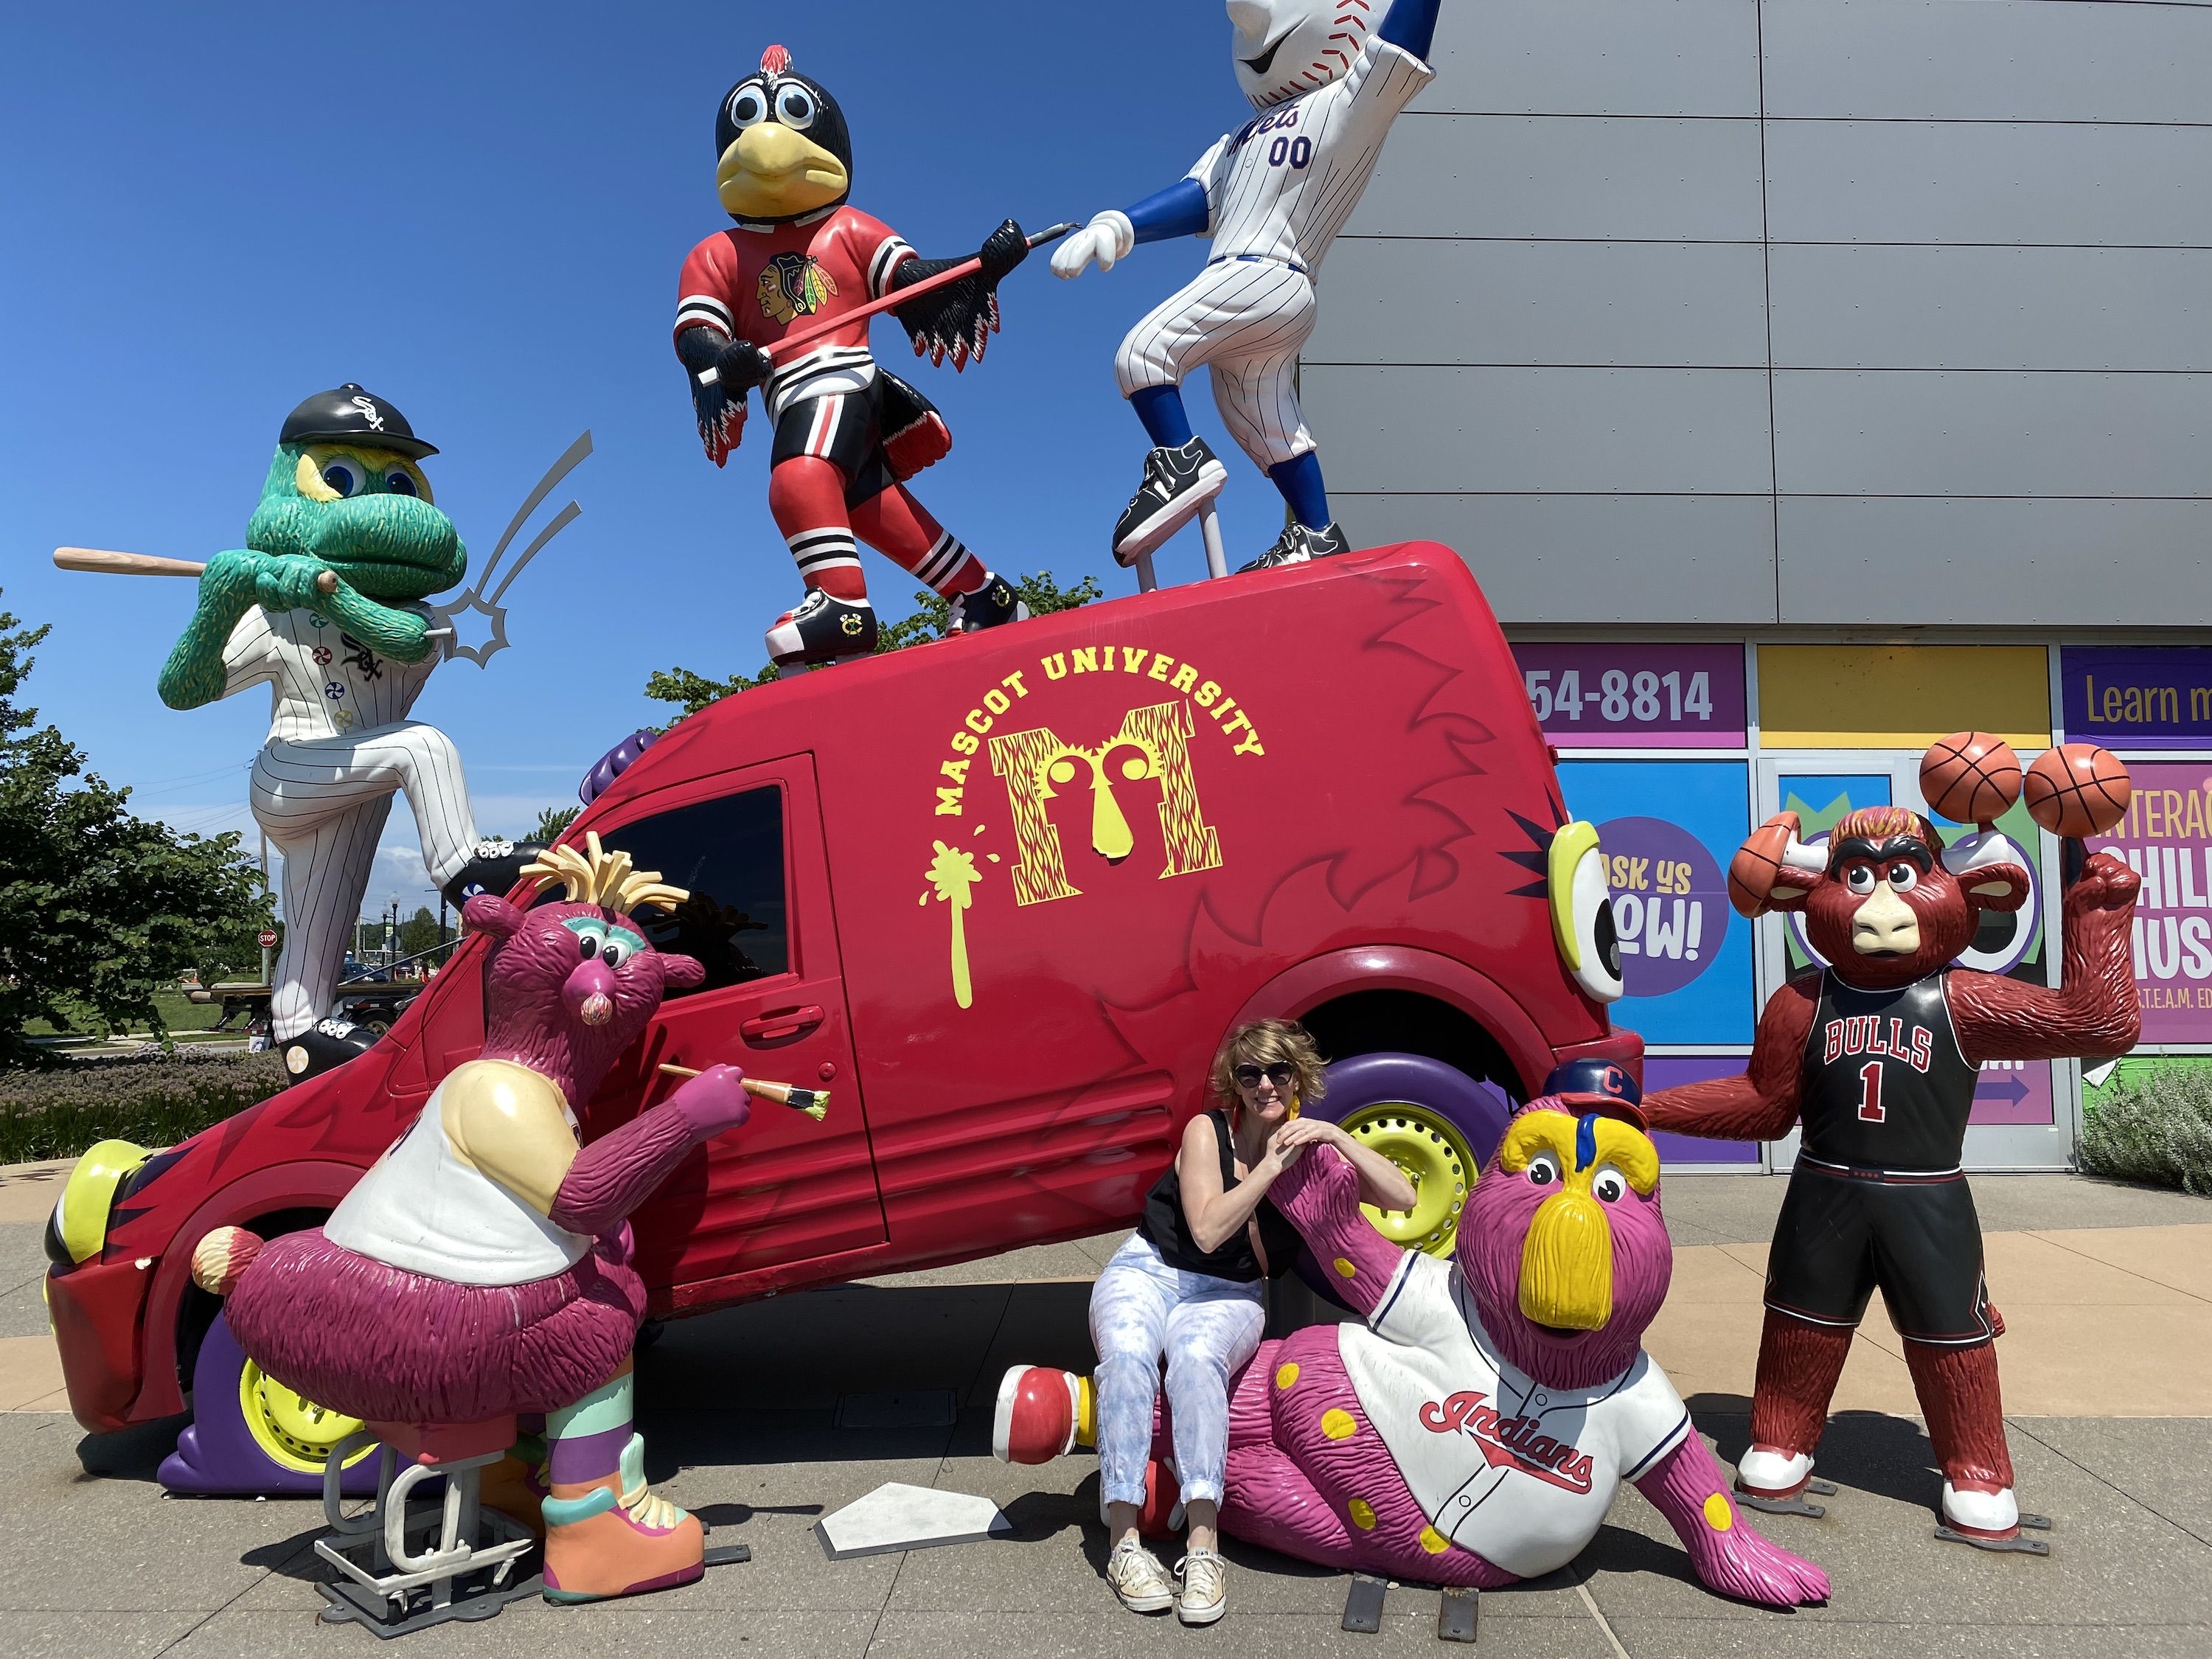 Large plastic figures of mascots climbing on a red truck, with woman sitting on one of the mascot's laps.